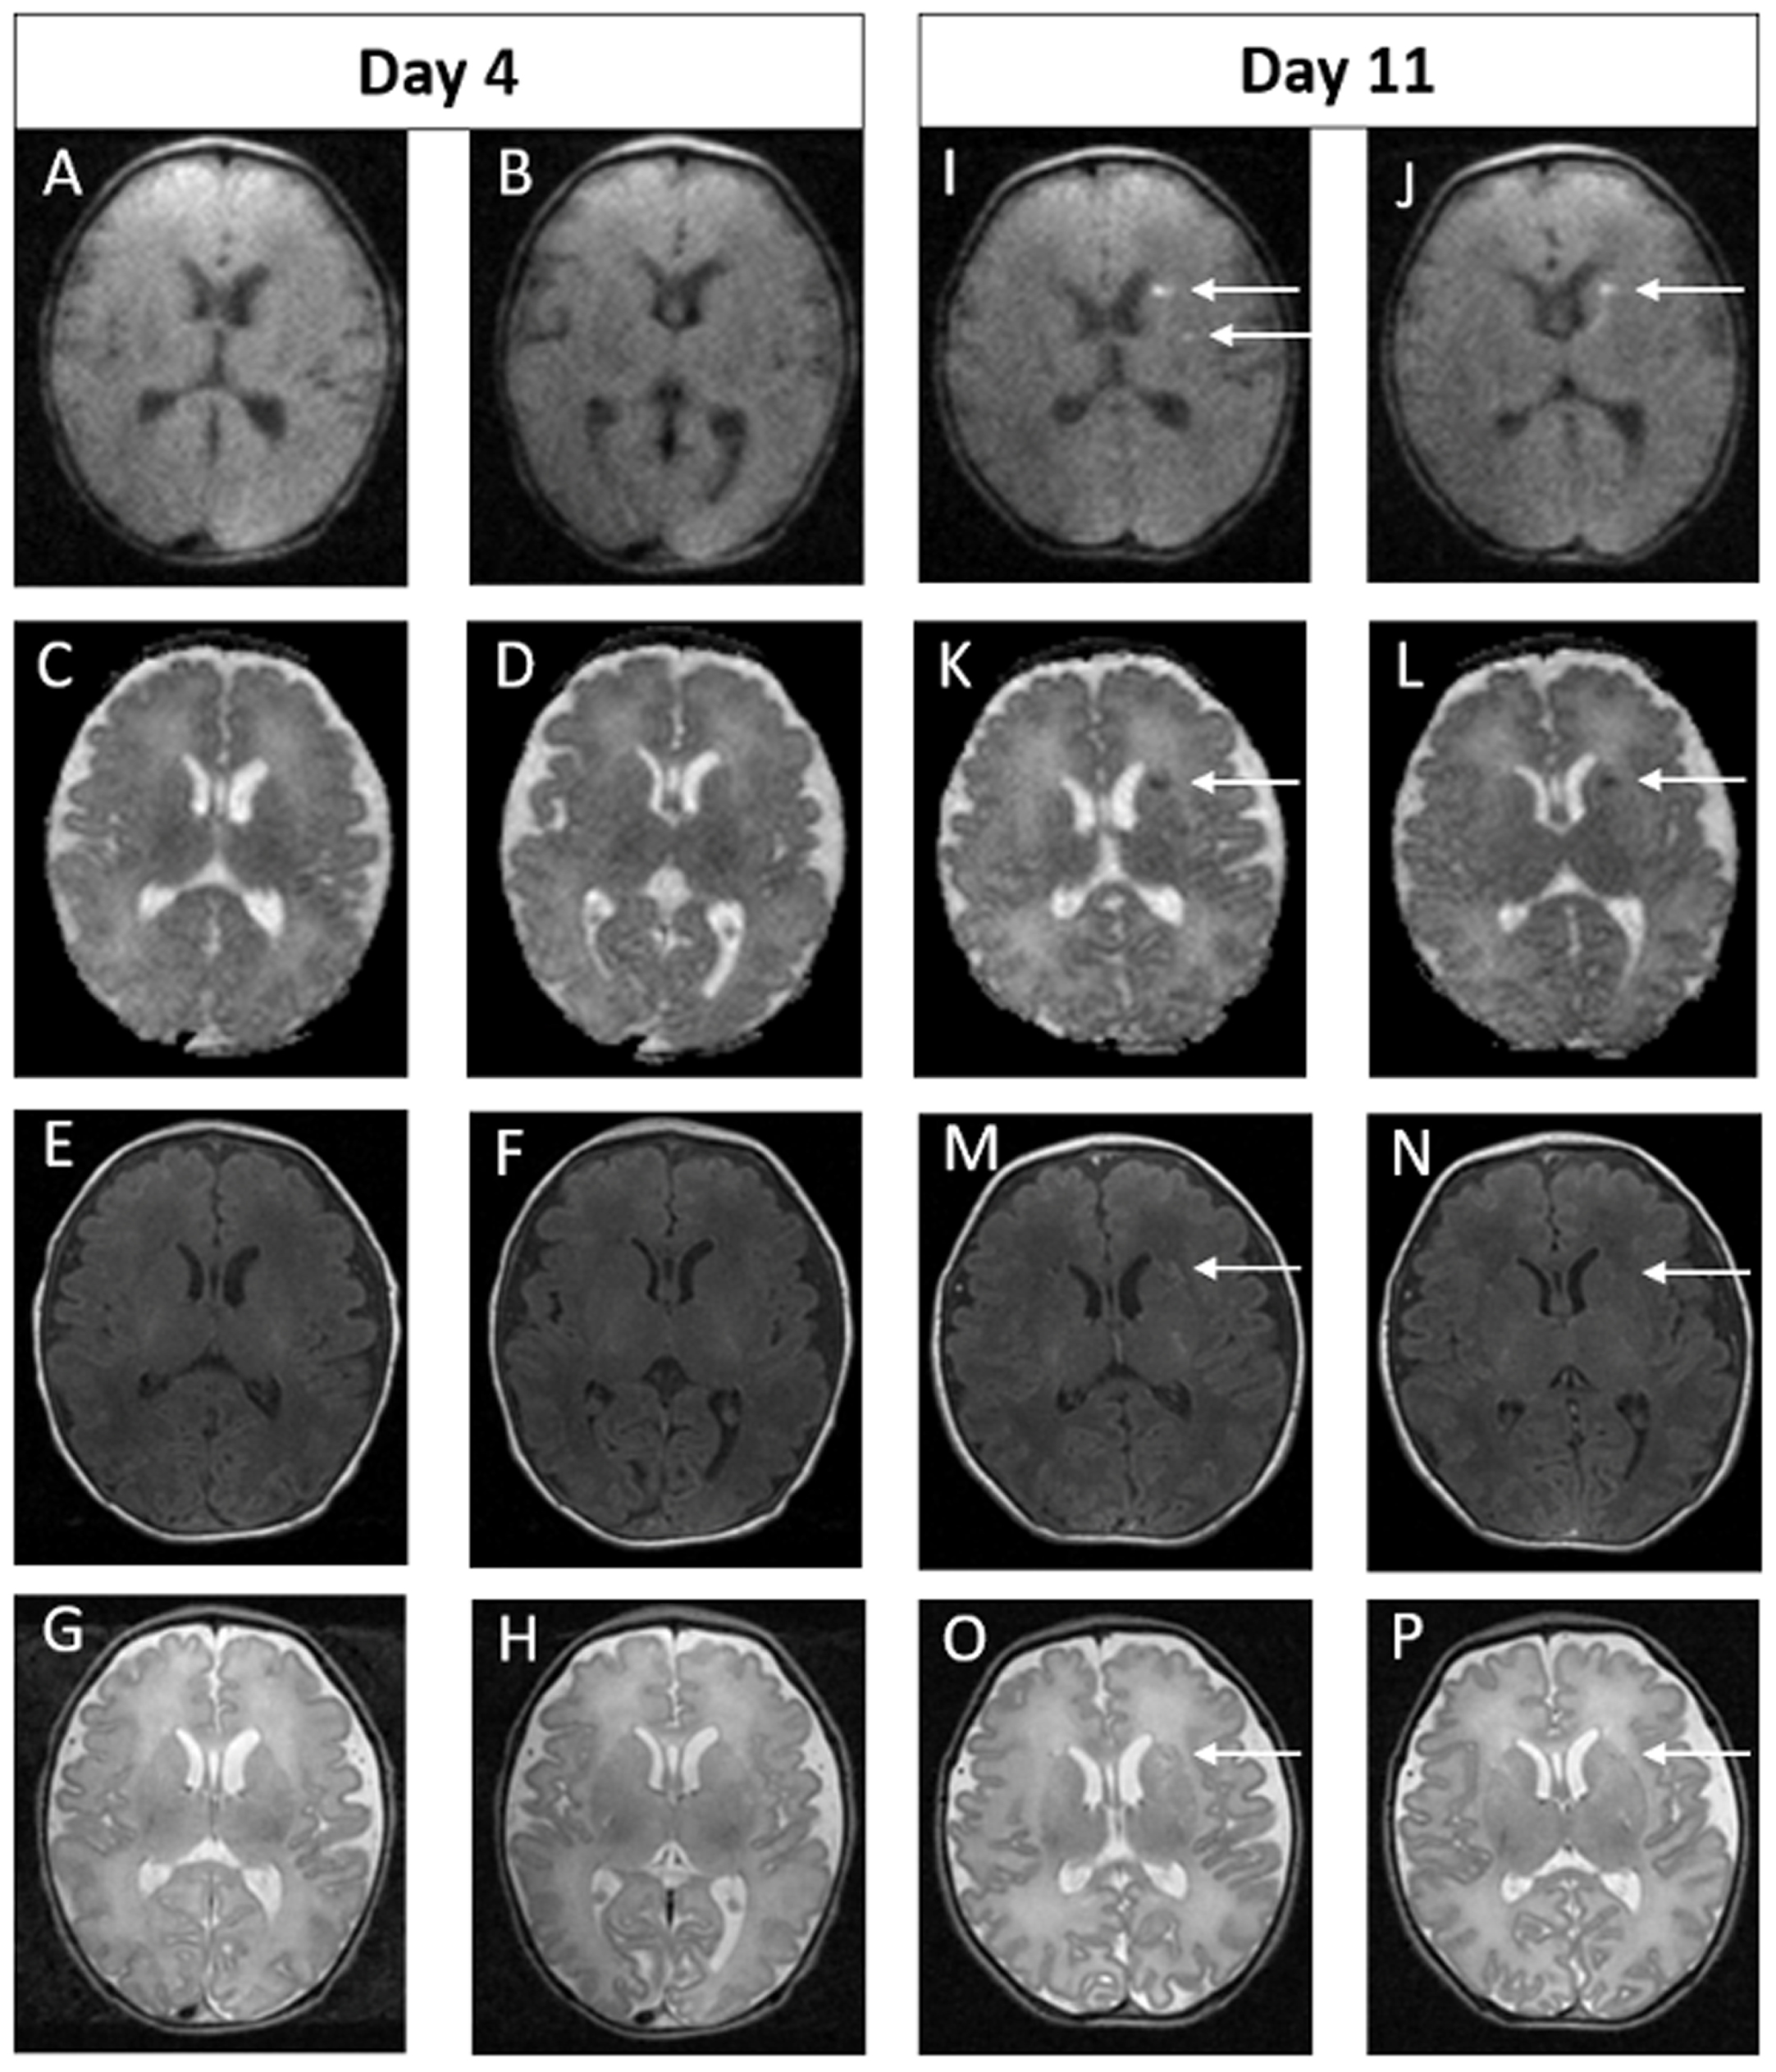 Example of MRI images of normal early scan and abnormal late scan. Images A-H on Day 4. Images I-P on Day 11. In the late scan, punctate foci of diffusion restriction in the left caudate head and left putamen are seen on DWI (I and J) and on ADC (K and L). Punctate foci seen in left external capsule on axial T1 (M and N) and T2 (O and P) weighted images. These findings are not evident on the early scan (A – H).